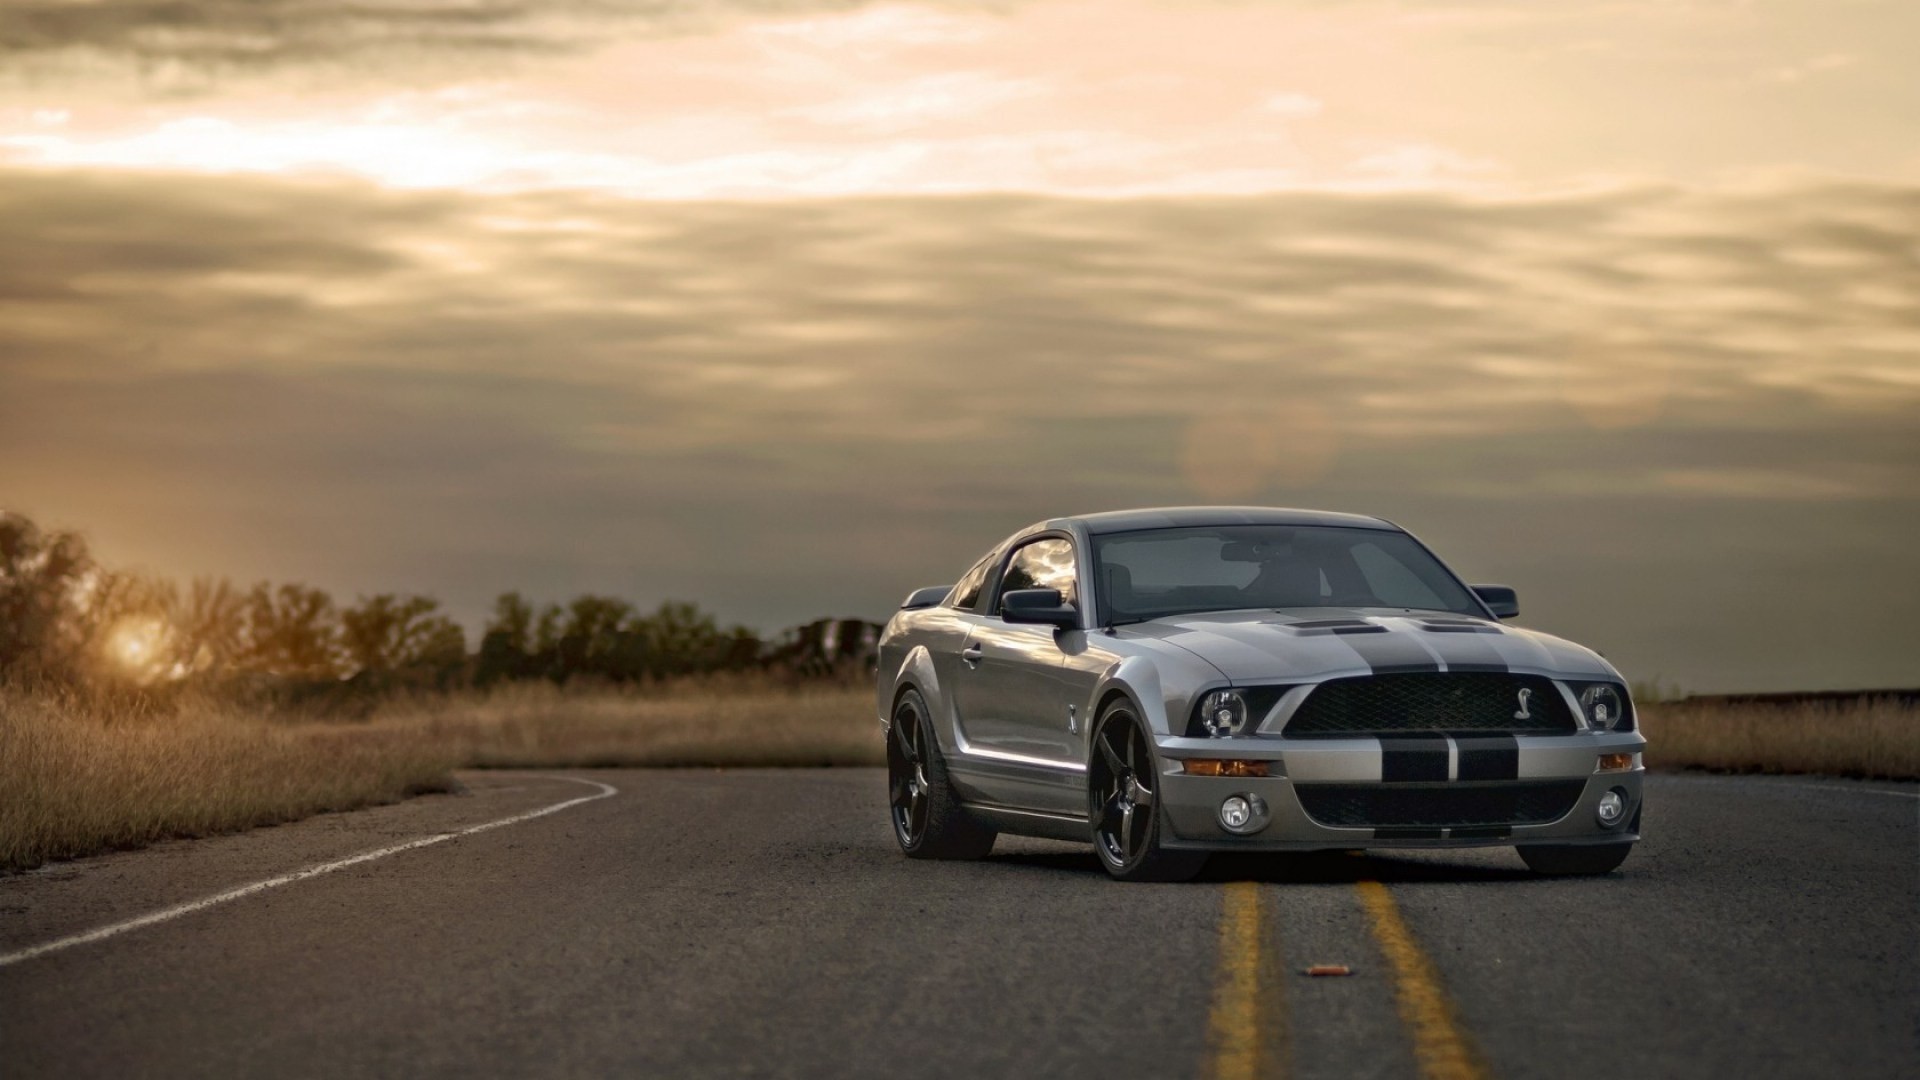 1920x1080 Ford Mustang Hd Wallpapers 1080p 56 Wallpaper